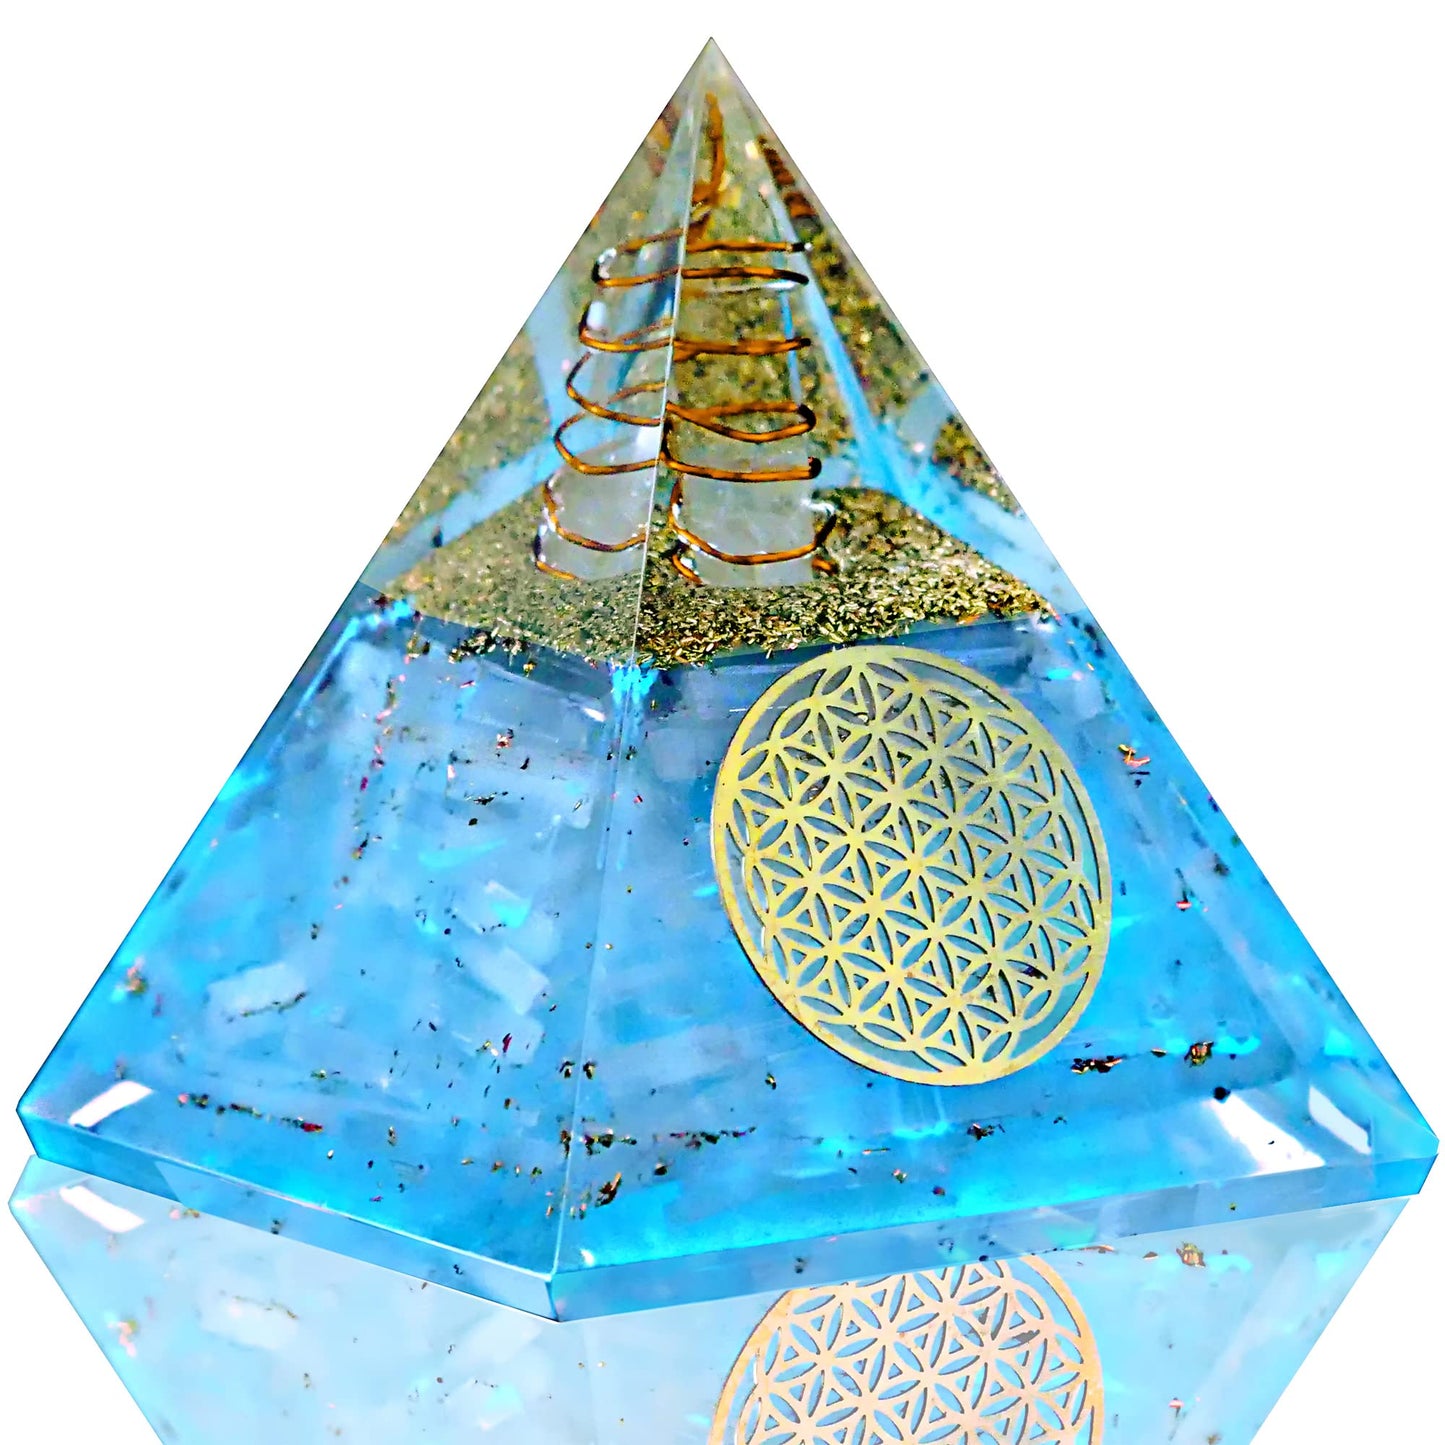 Anaya Agate Selenite Glow Orgonite Pyramid – Handmade Selenite Orgone Pyramid for High Frequency Vibration, Powers of Manifestation – White Crystal Pyramid Promotes Peace and Calmness